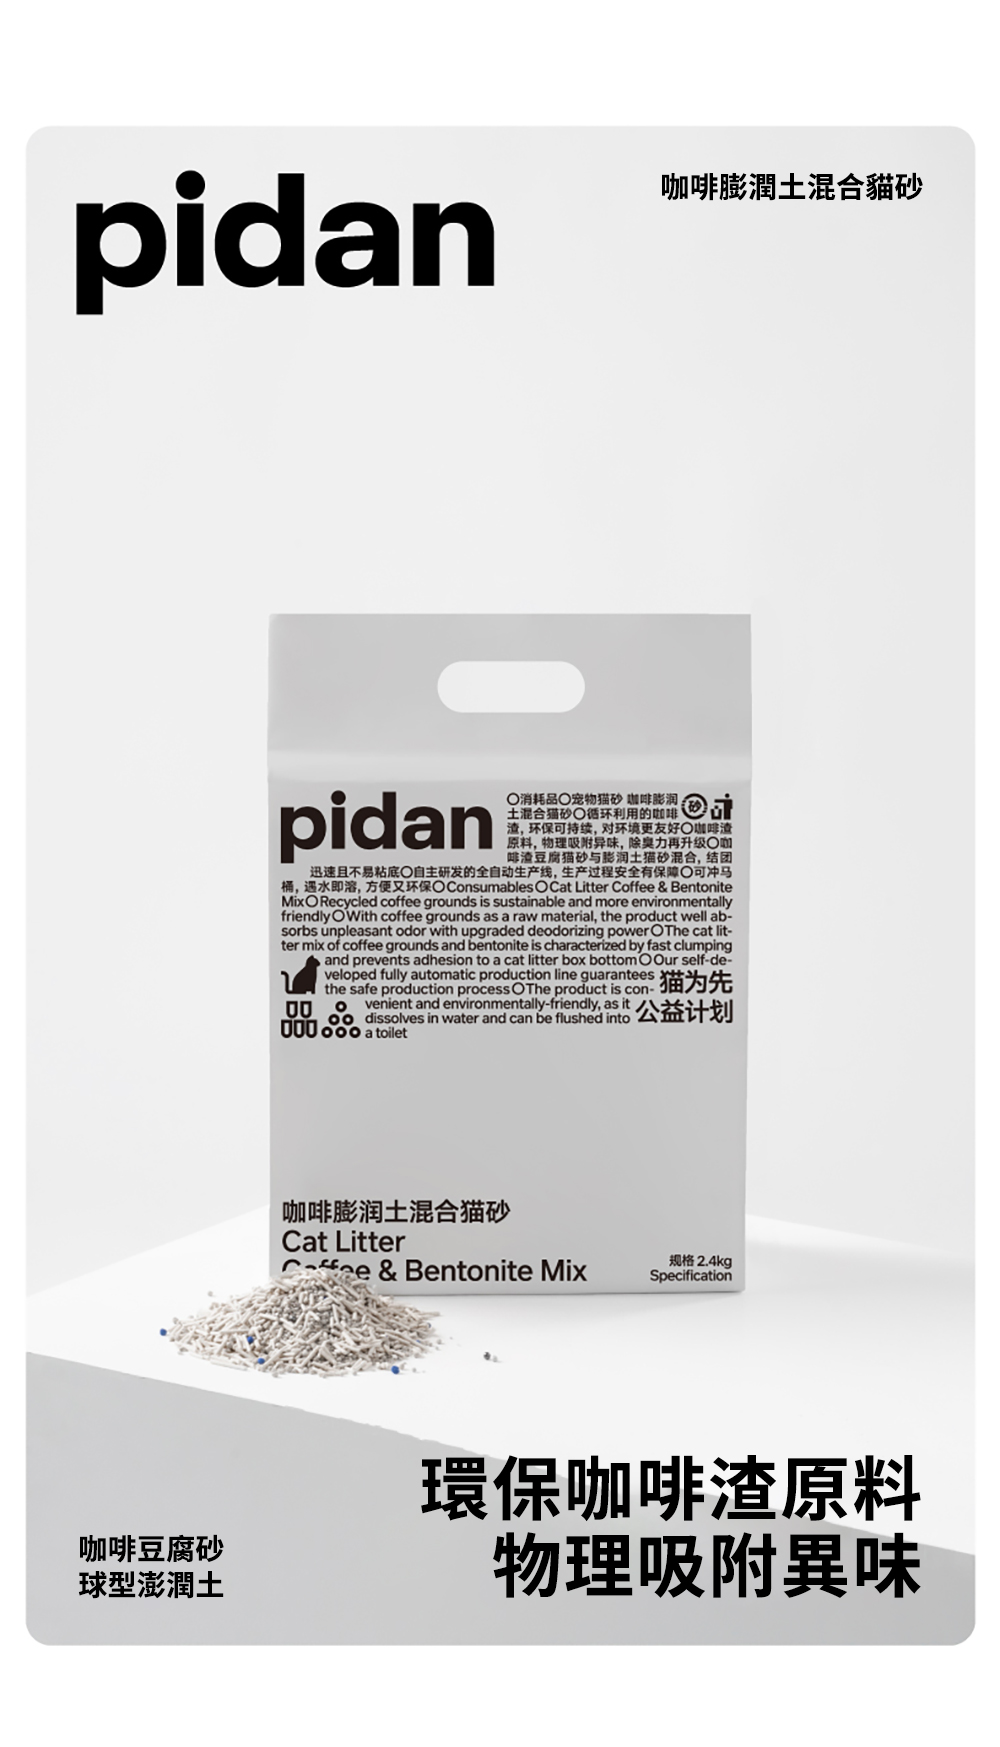 pidan膨潤土混合貓砂pidan消耗品宠物 咖啡土混合猫砂循环利用的咖啡渣环保可持续对环境更友好咖啡渣原料物理吸附异味,力再升级咖啡渣豆腐猫砂与膨润土猫砂混合,结团迅速且不易粘底自主研发的全自动生产线,生产过程安全有保障 可冲马桶,遇水即溶,方便又环保 Consumables O Cat Litter  & BentoniteMixO Recycled coffee grounds is sustainable and more environmentallyfriendly OWith coffee grounds as a raw material, the product well ab-sorbs unpleasant odor with upgraded deodorizing power OThe cat lit-ter mix of coffee grounds and bentonite is characterized by fast clumping, and prevents adhesion to a cat litter box bottomOOur self-de-veloped fully automatic production line guaranteesthe safe production process    猫为先venient and environmentally-friendly, as it, dissolves in water and can be flushed 000  a toilet咖啡膨润土混合猫砂Cat LitterCoffee & Bentonite Mix规格 2.4kgSpecification咖啡豆腐砂球型澎潤土環保咖啡渣原料物理吸附異味